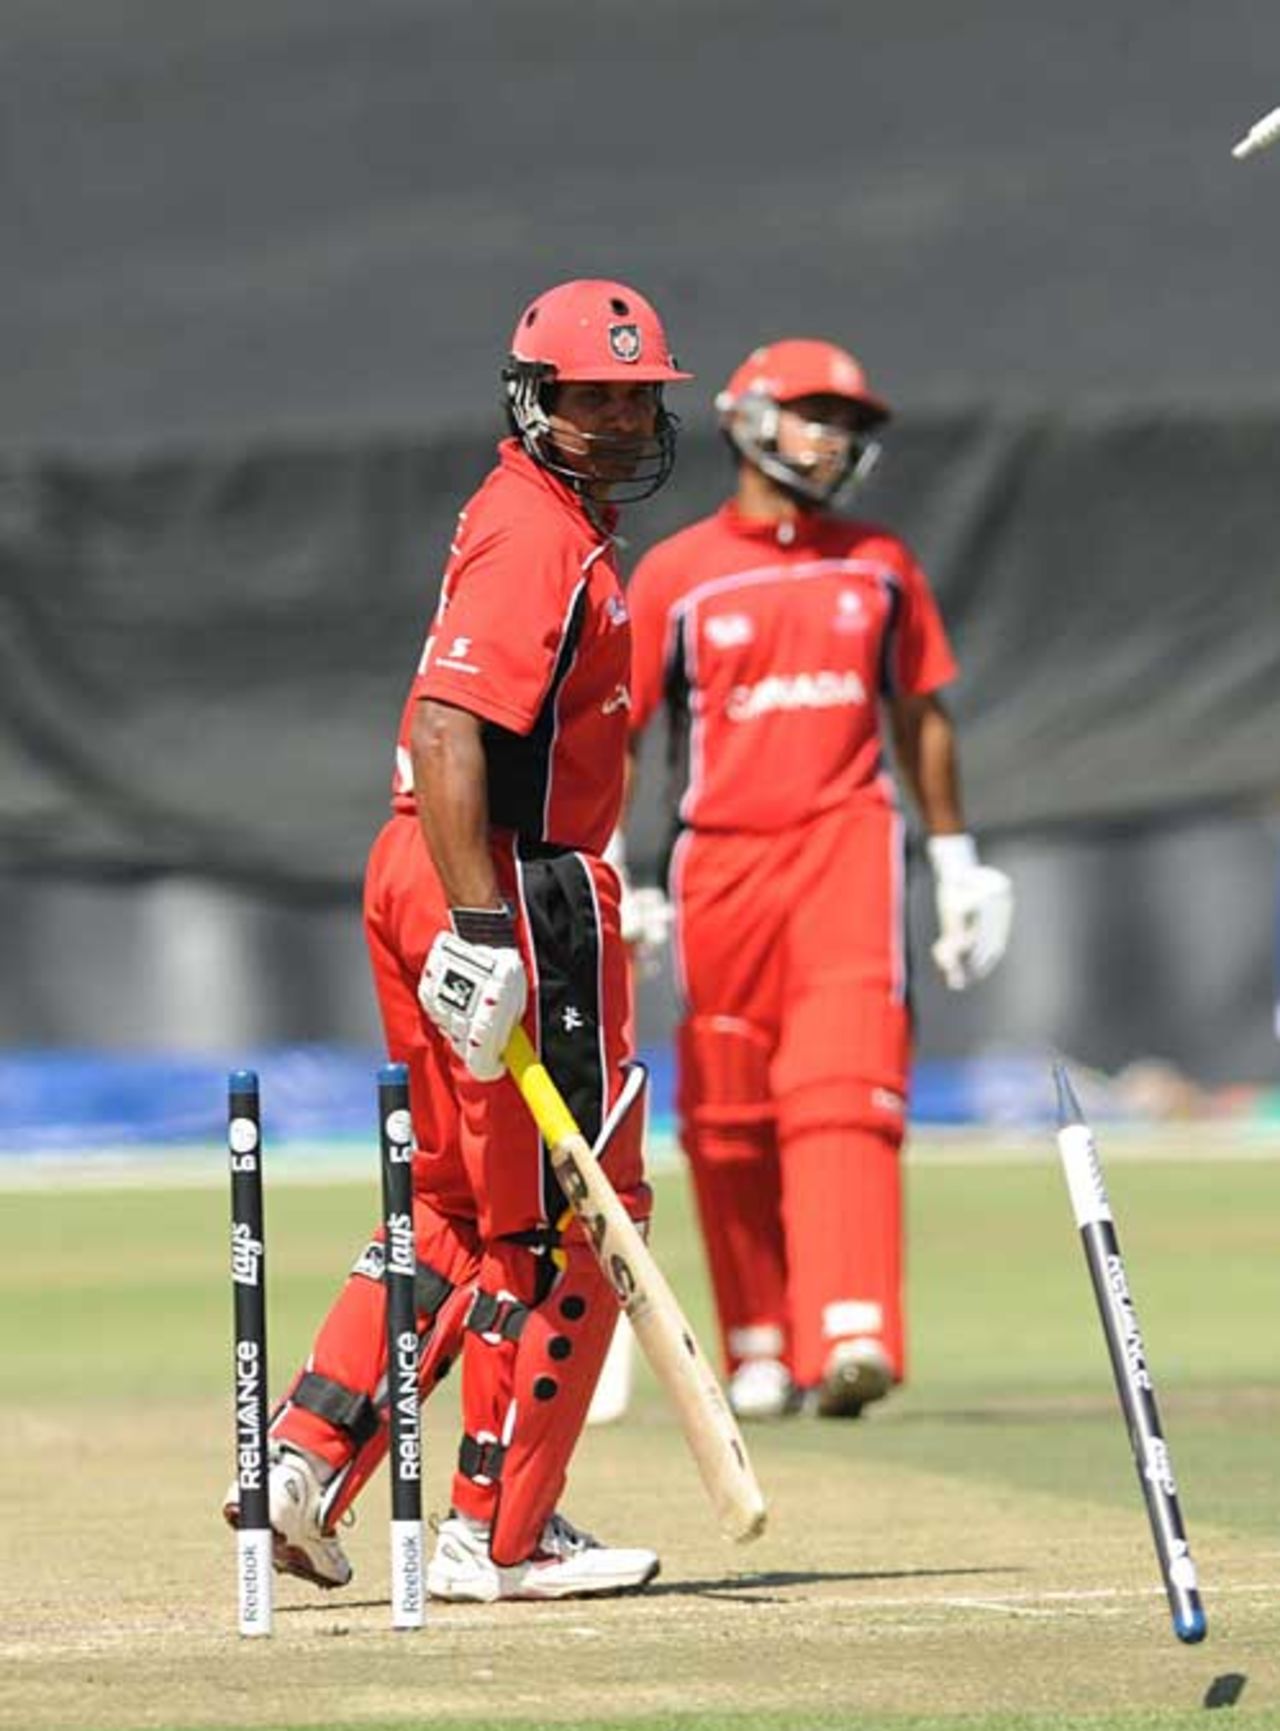 Sunil Dhaniram watches his stumps fly as he is bowled for 41, Canada v Scotland, ICC World Cup Qualifiers, Benoni, April 8, 2009